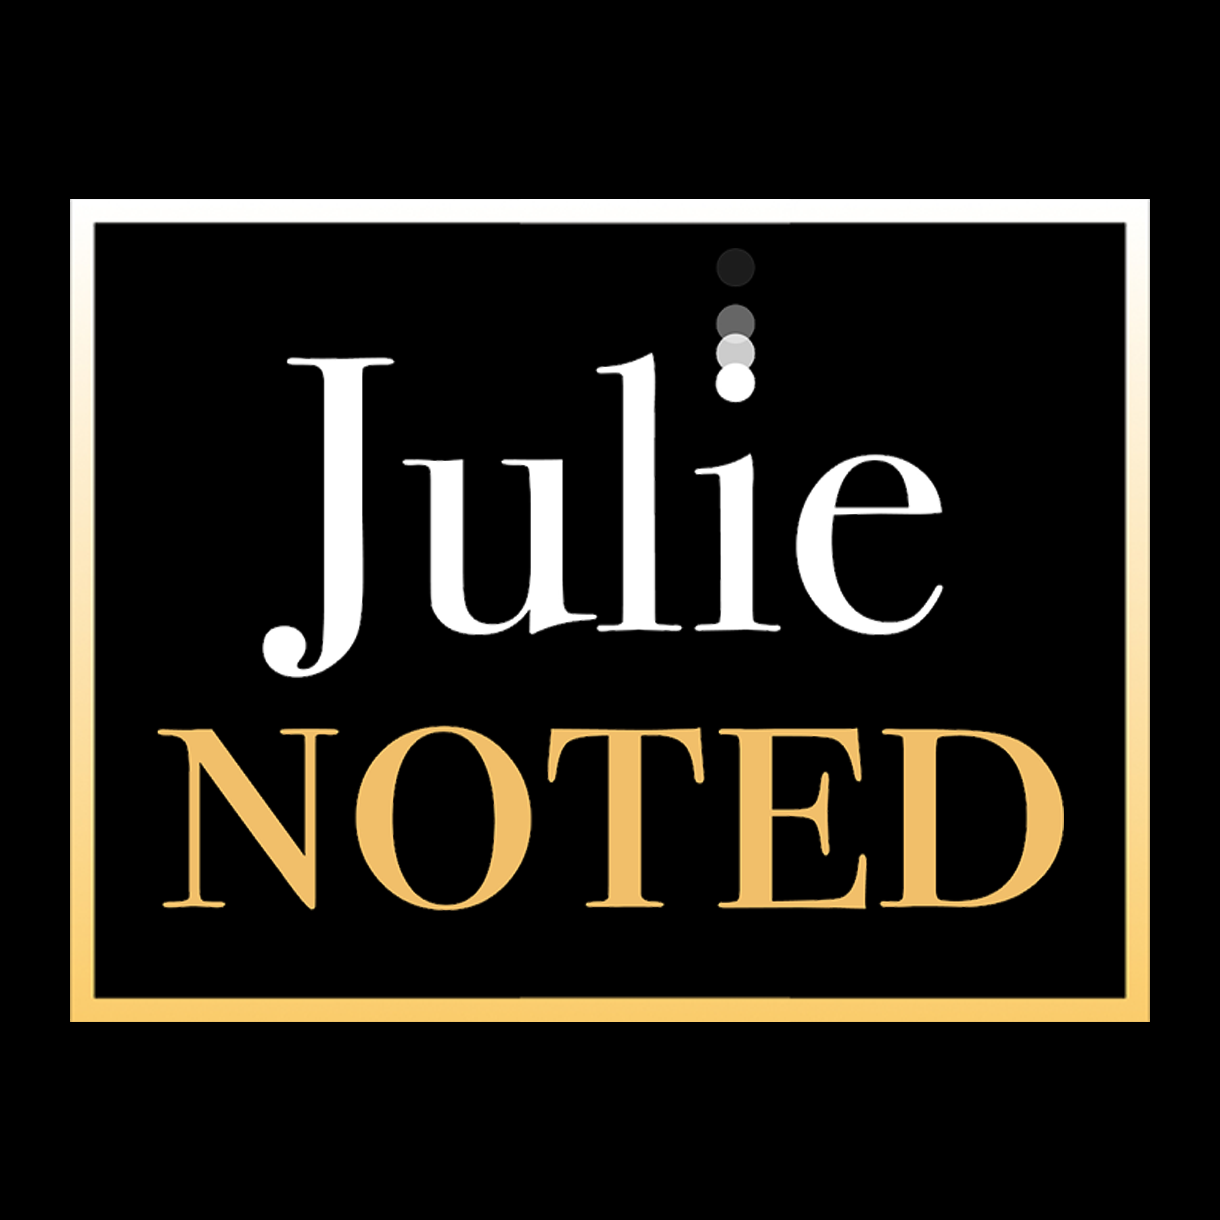 Do Women Want to Work for Other Women? – Julie Noted